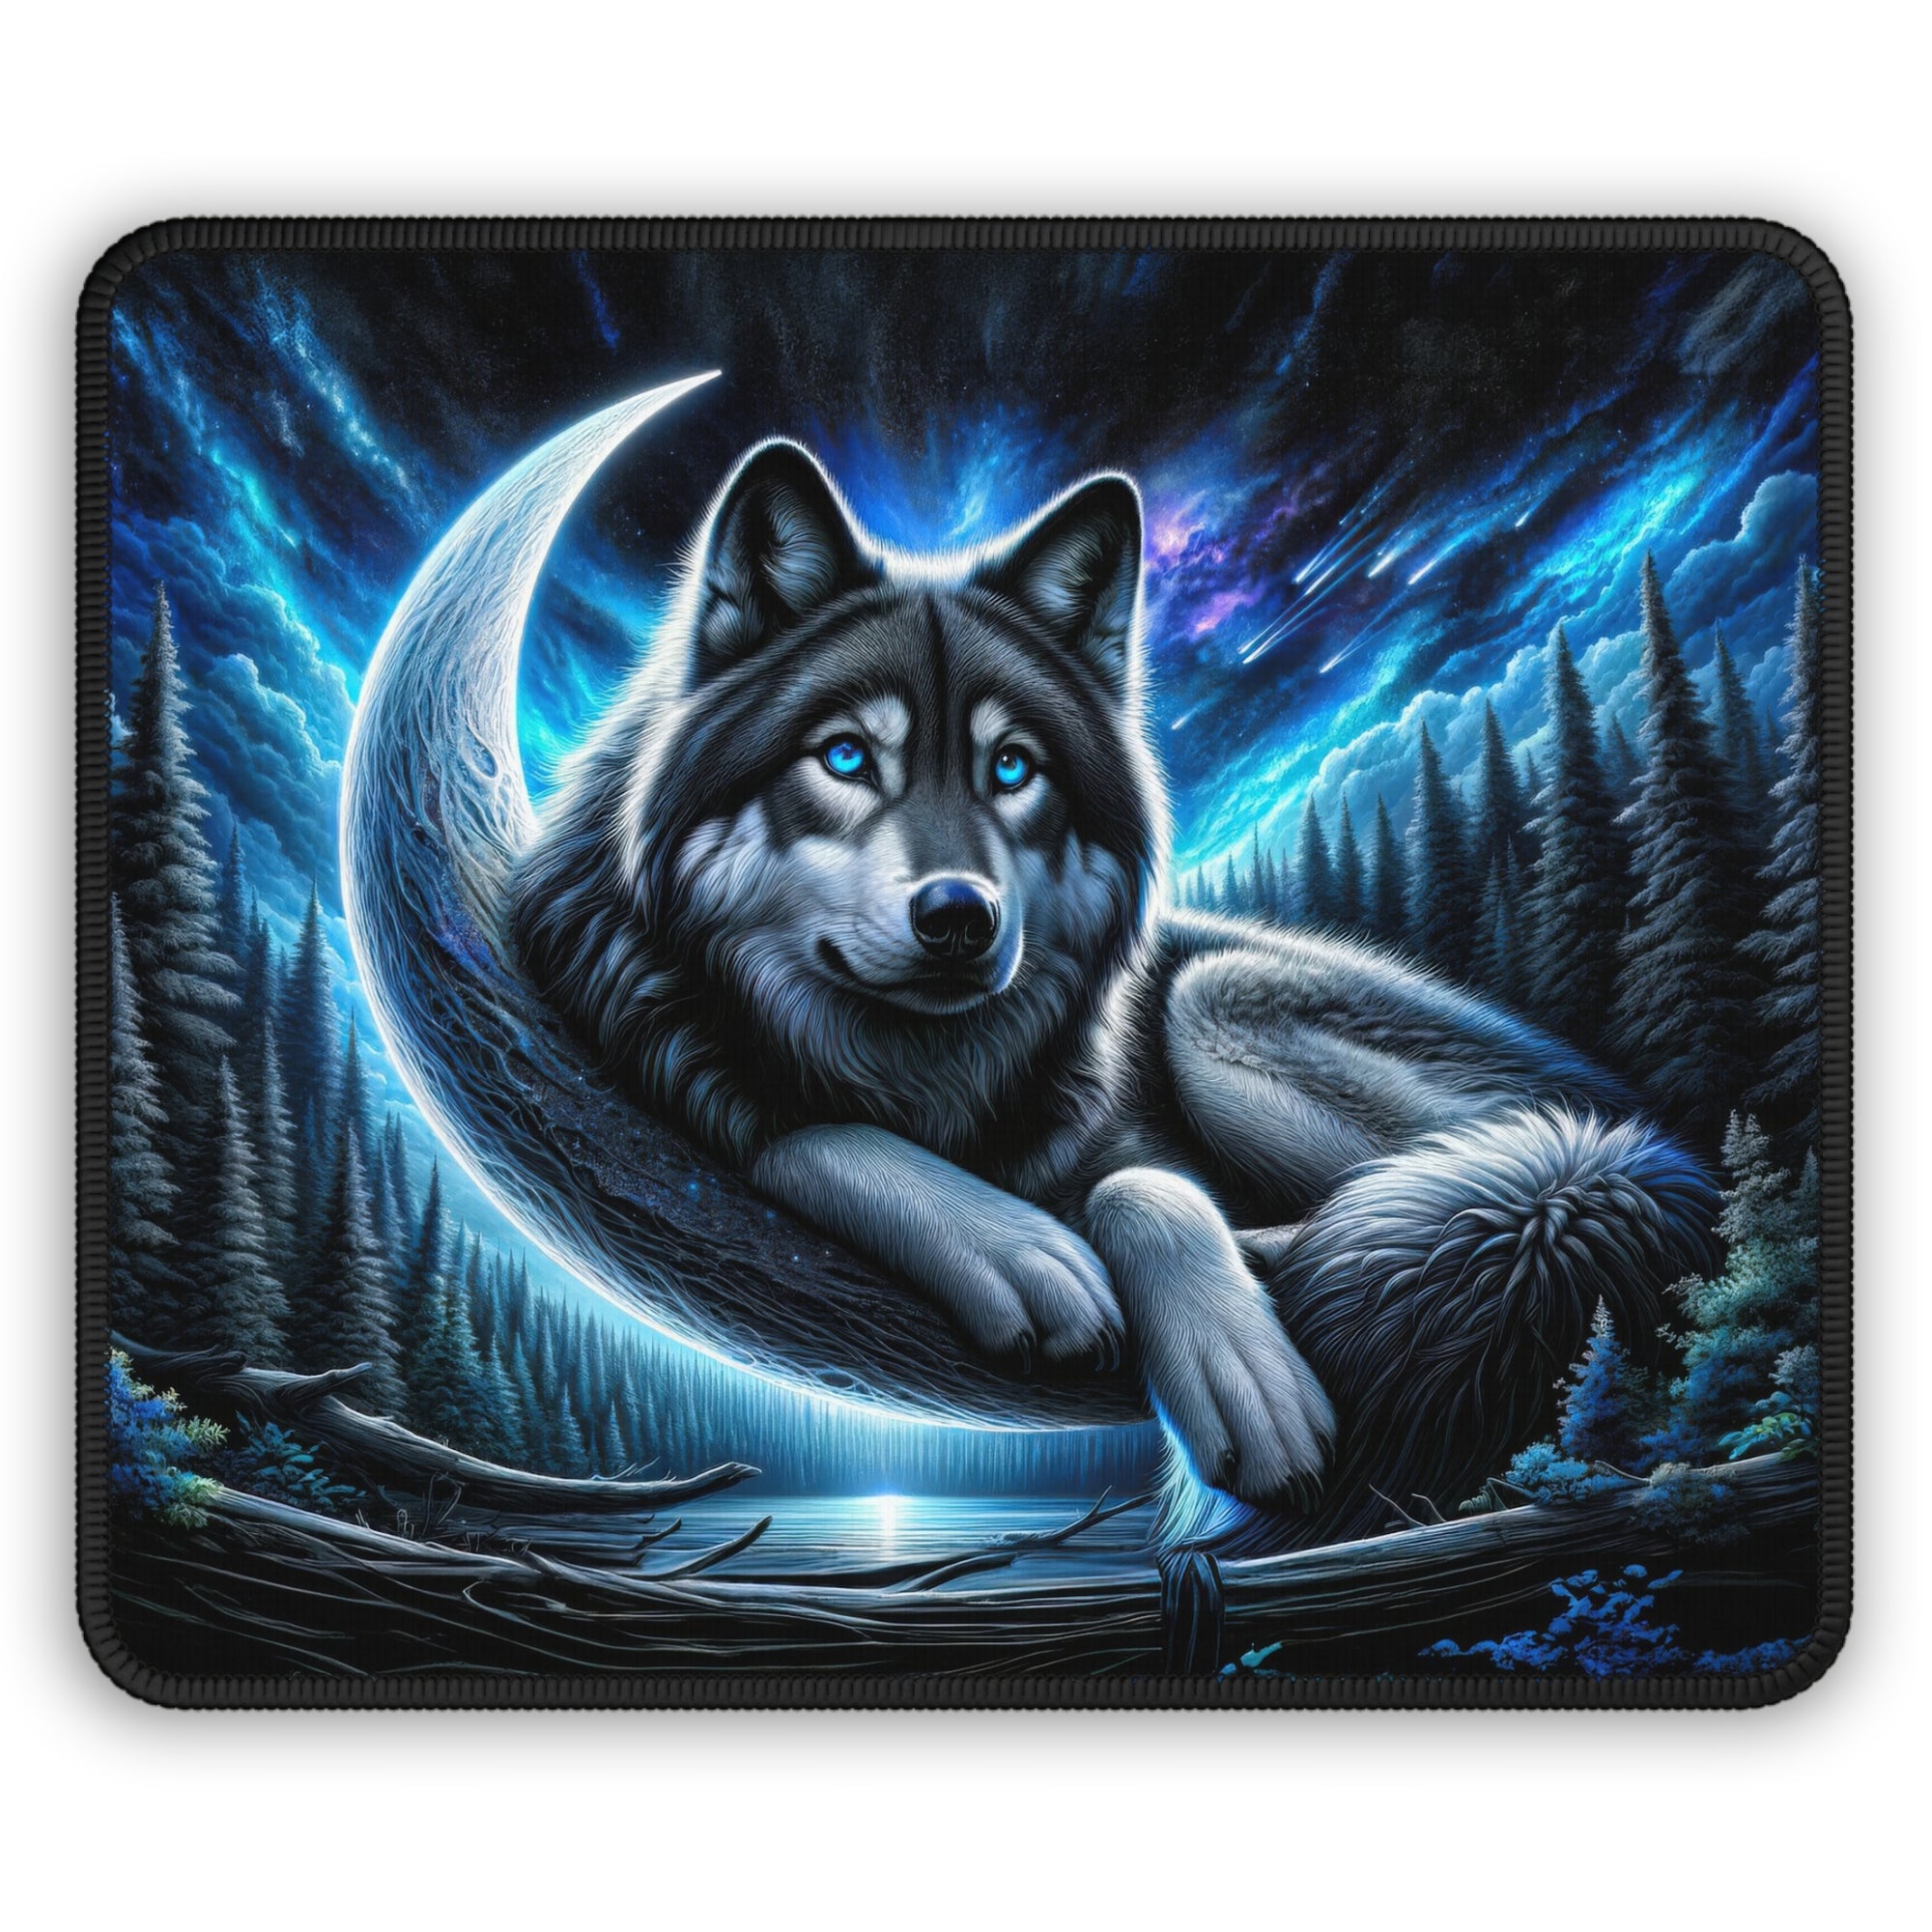 The Wolf's Cosmic Watch Mouse Pad